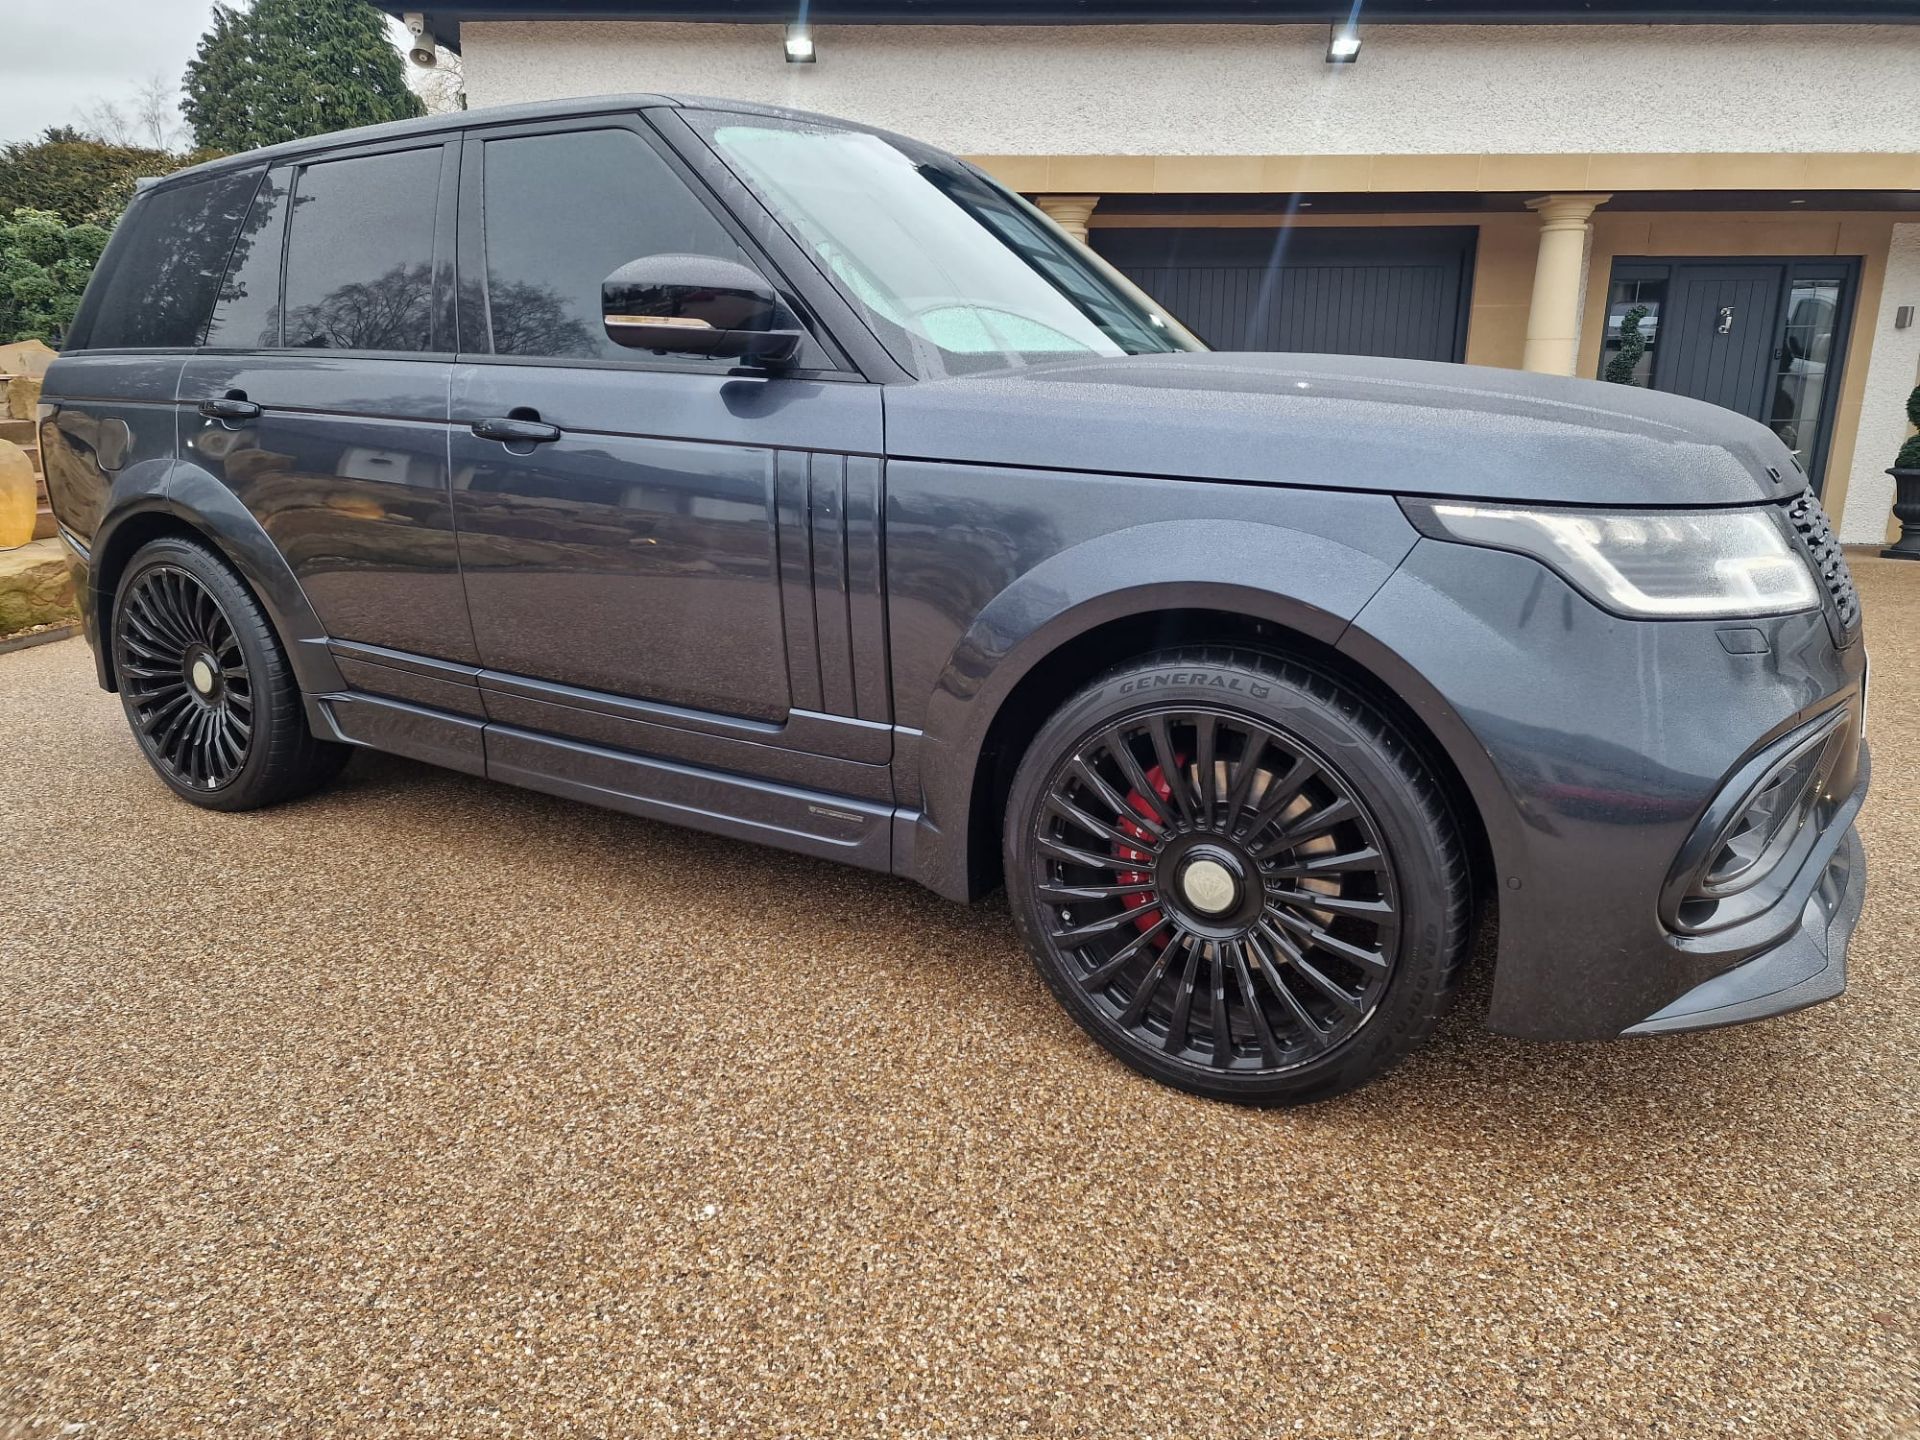 2018/68 RANGE ROVER SV AUTOBIOGRAPHY DYN V8 SC AUTO - £40K WORTH OF ONYX BODY KIT AND CONVERSION - Image 5 of 77